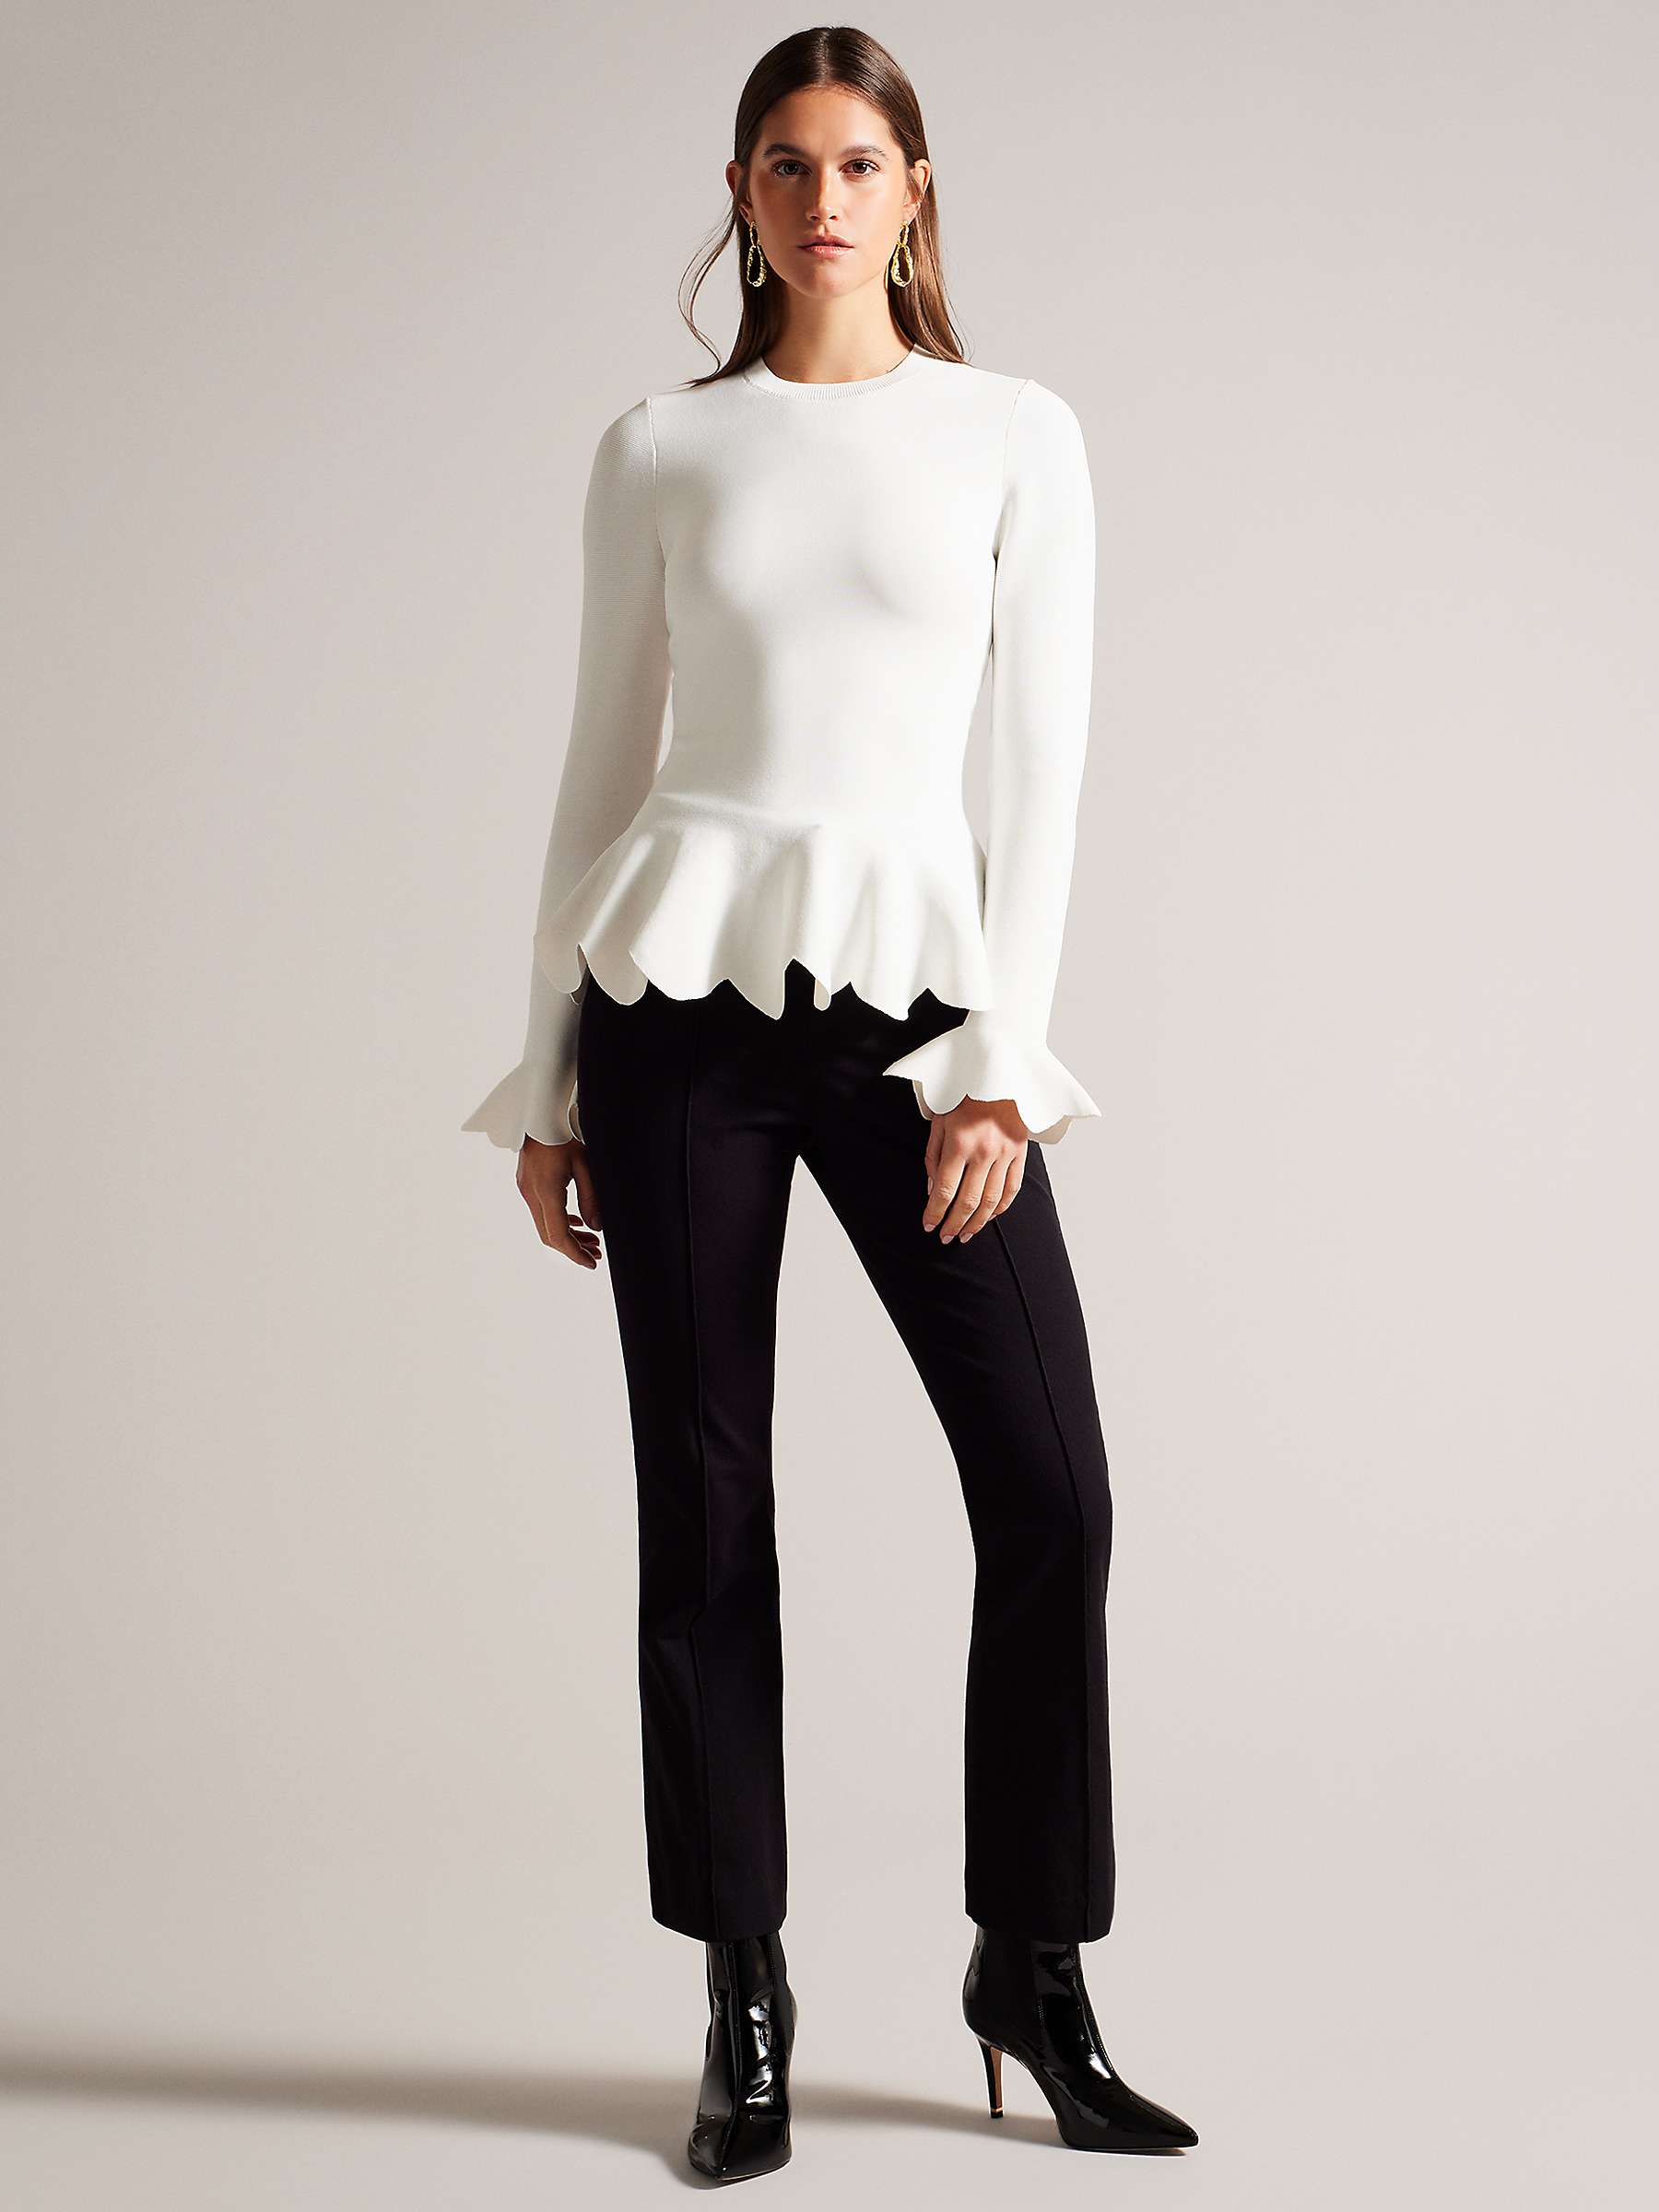 Buy Ted Baker Lillyyy Long Sleeve Scalloped Peplum Top Online at johnlewis.com